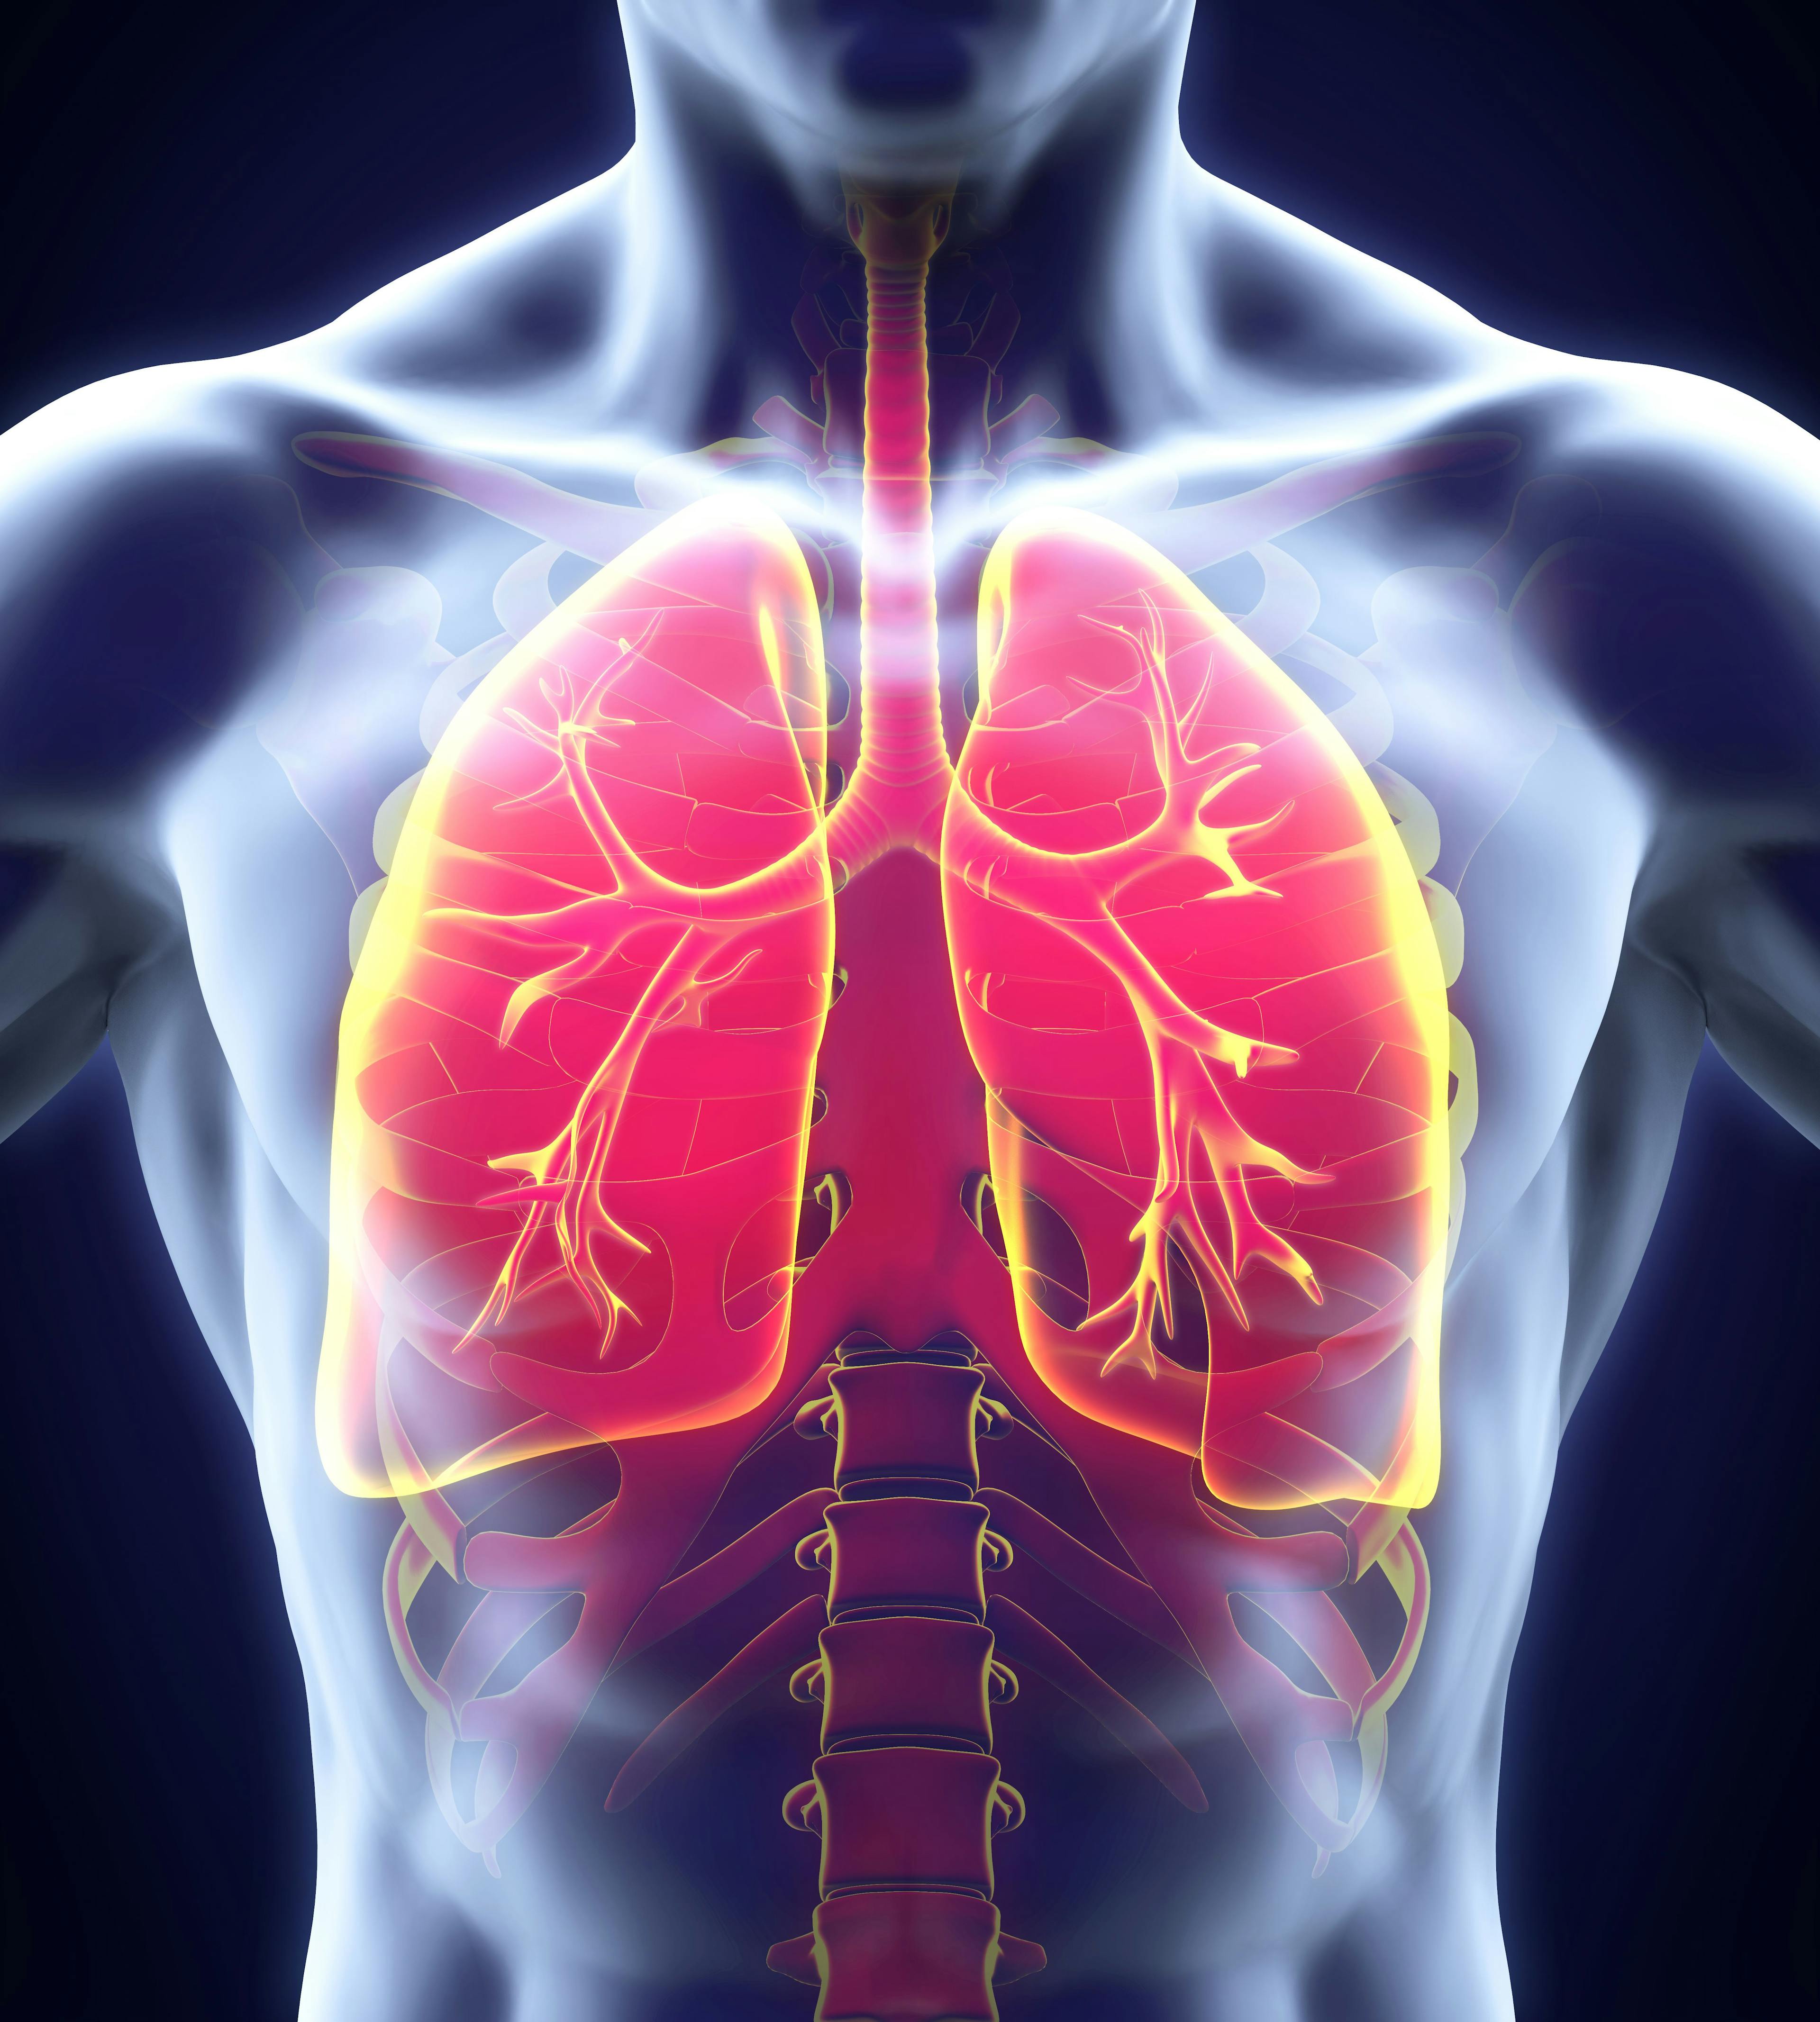 Study: Lung Function Unaffected After COVID-19 Infection in Young Adults